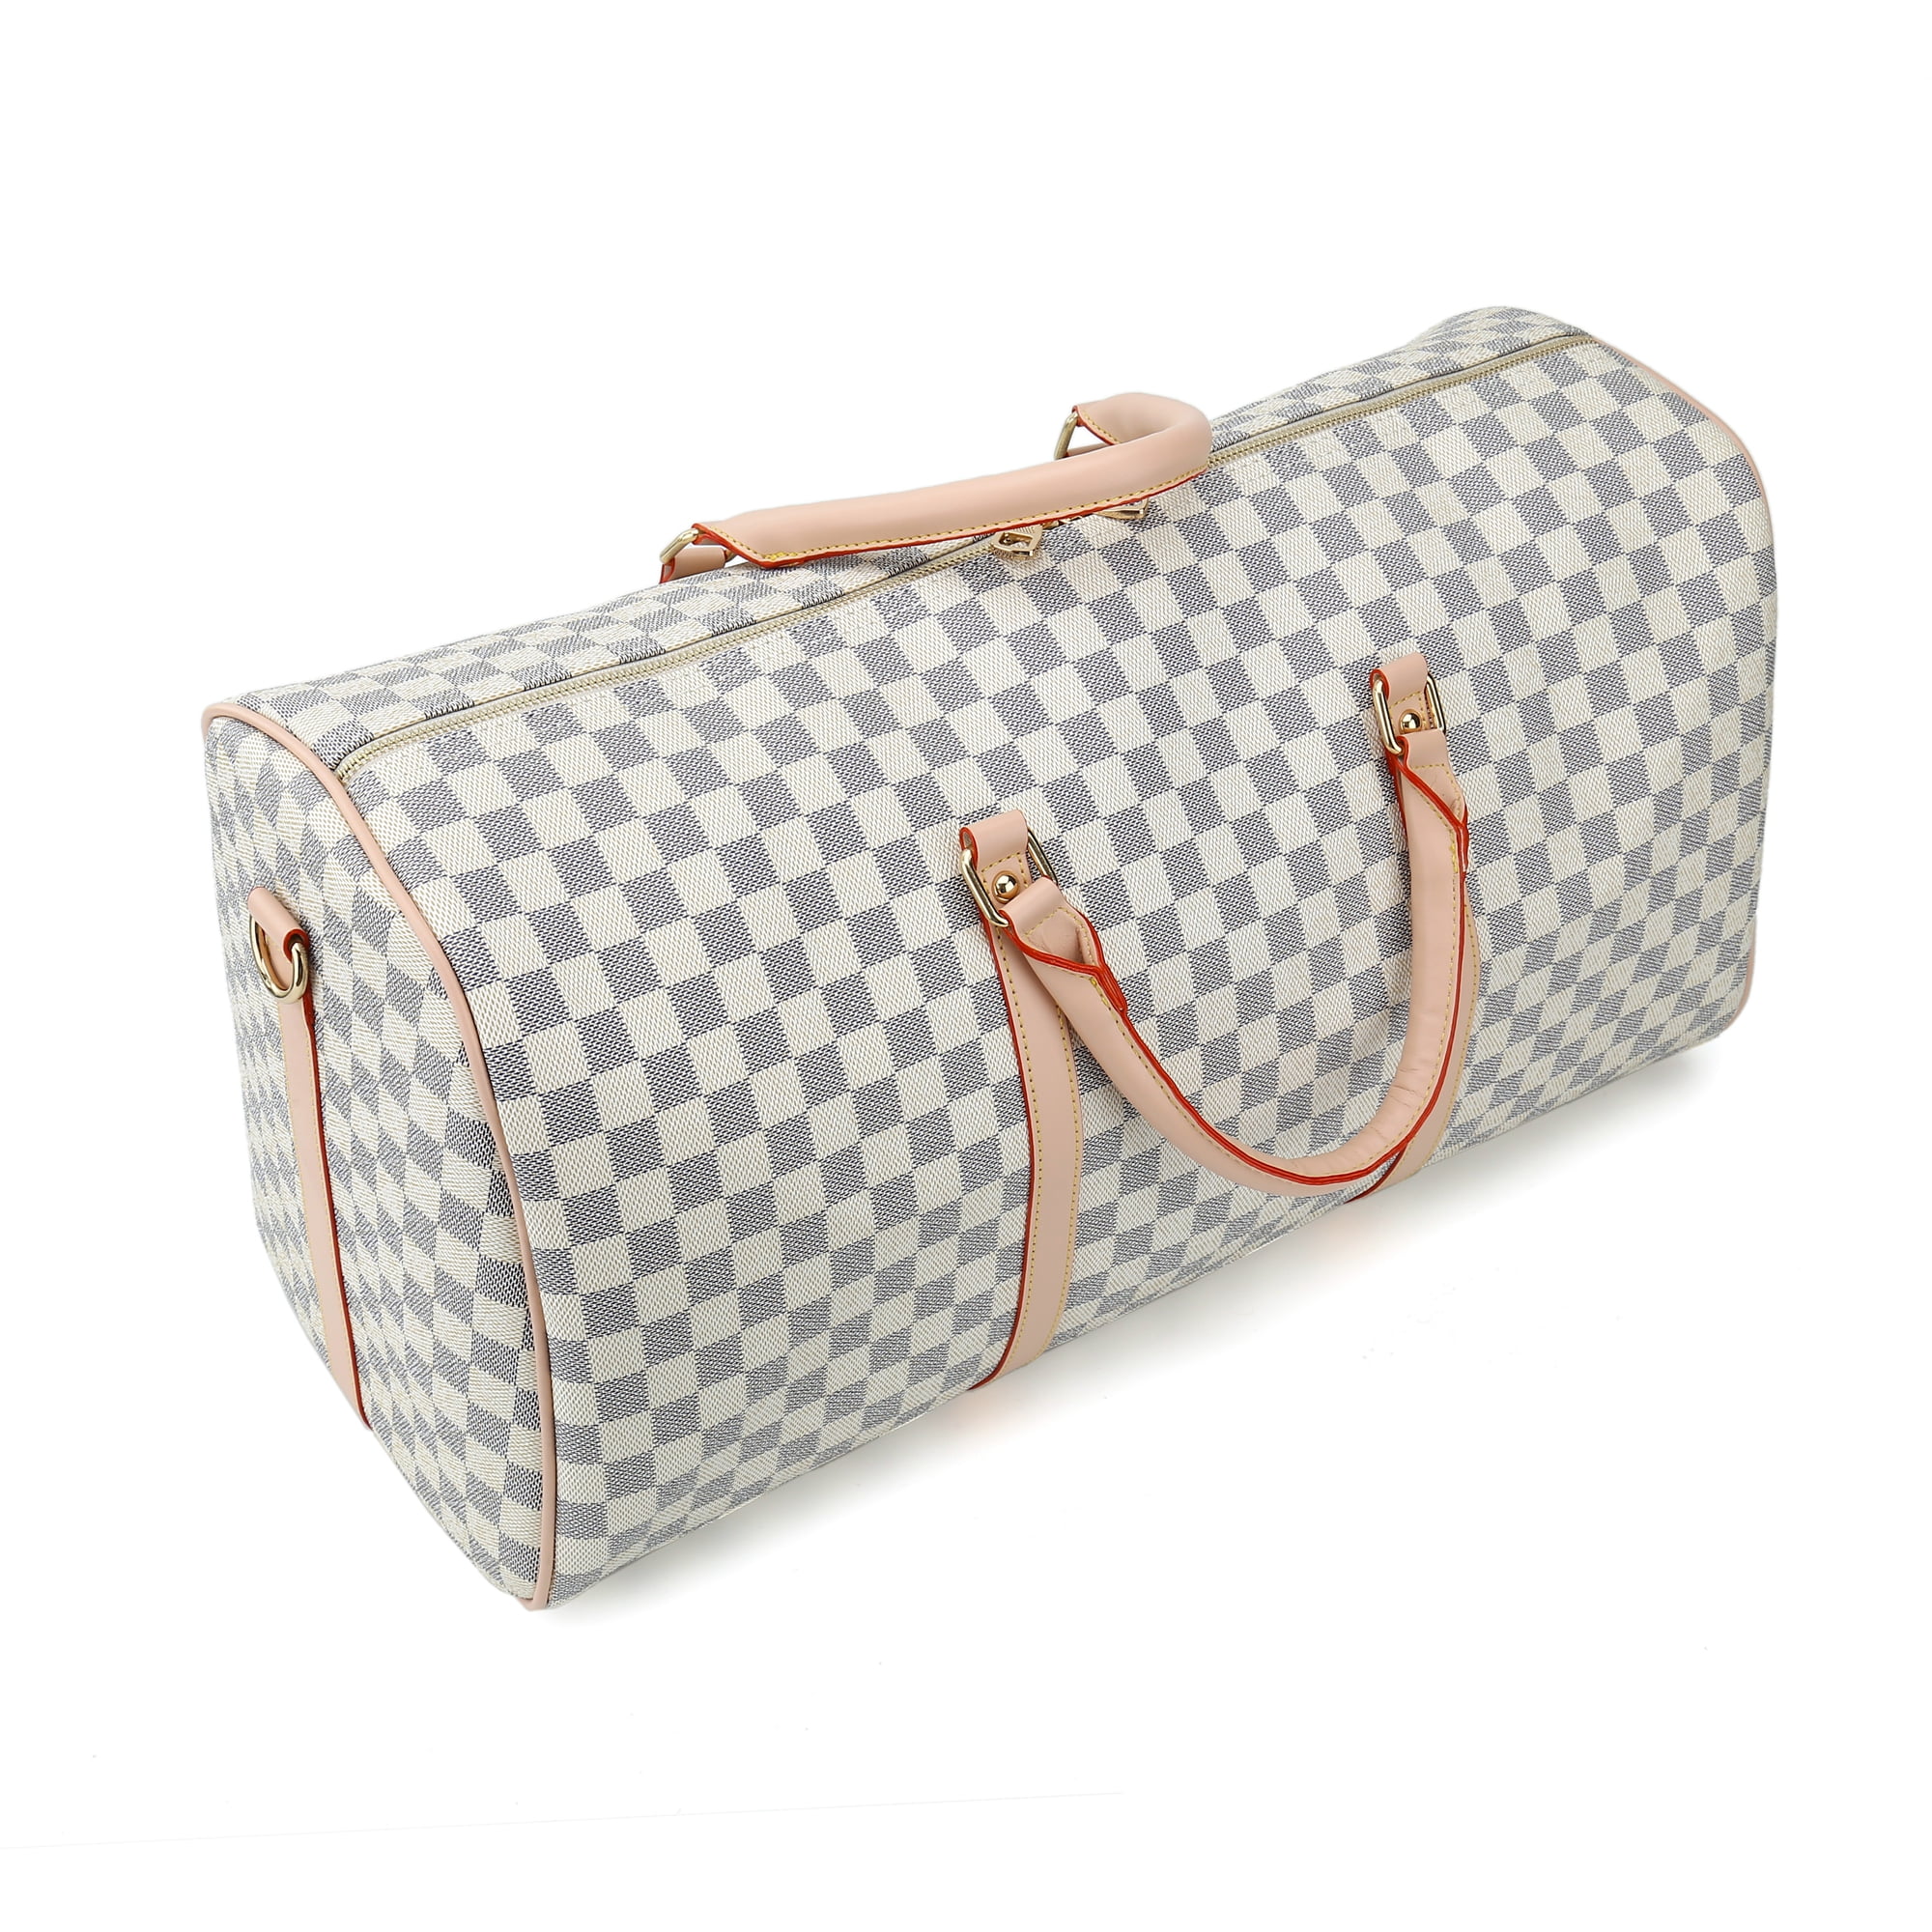 The Louis Vuitton Keepall Bandoulière 45  Is The Glorified Duffle Bag  Worth The 2100 Price Tag  Retail Bum